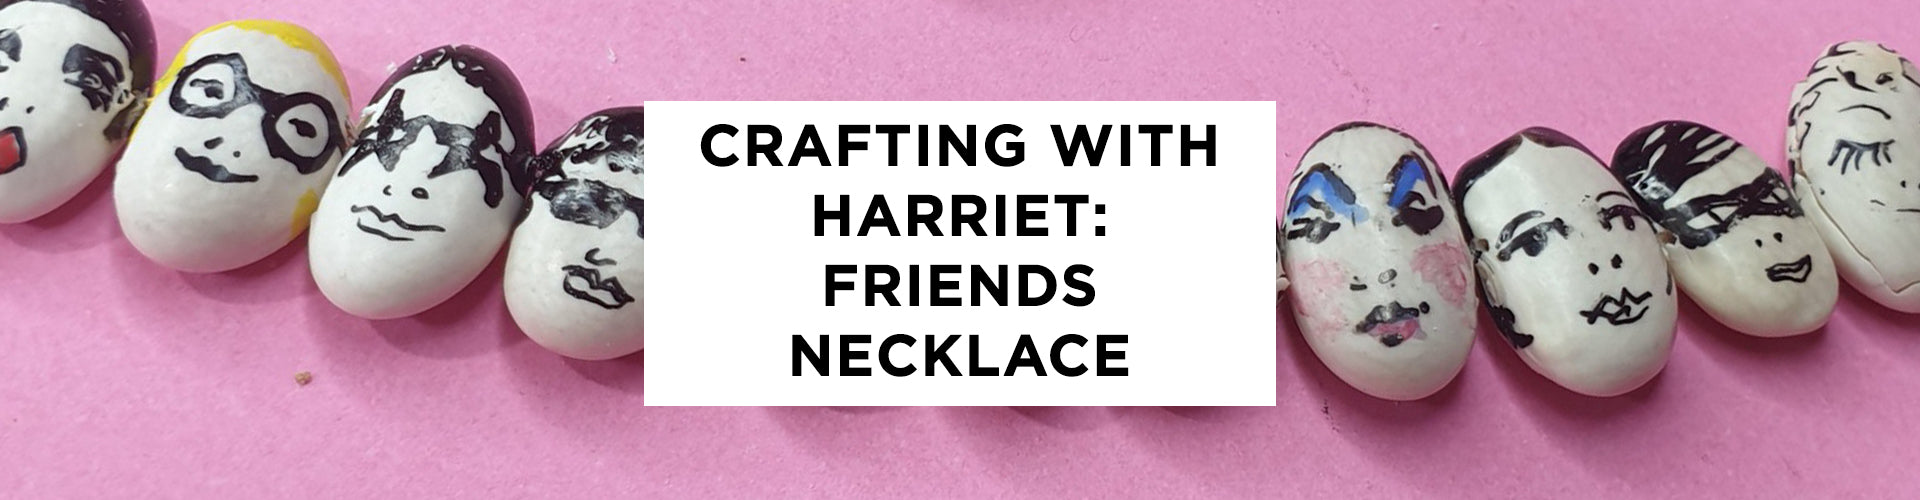 Crafting at Home with Harriet: Friends Necklace